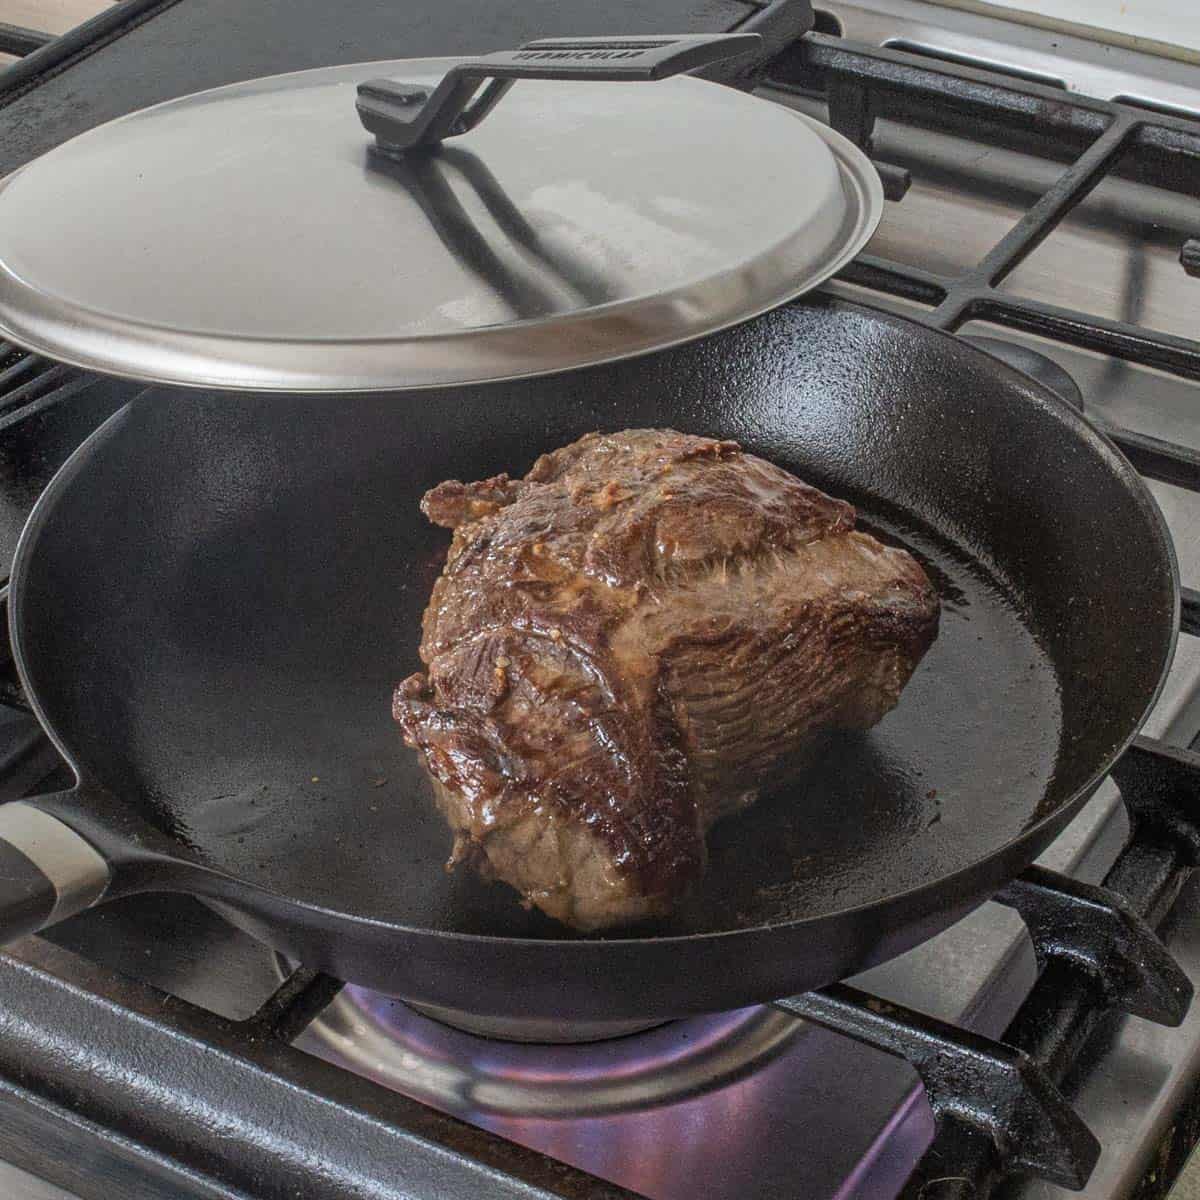 Browning a piece of venison in a pan